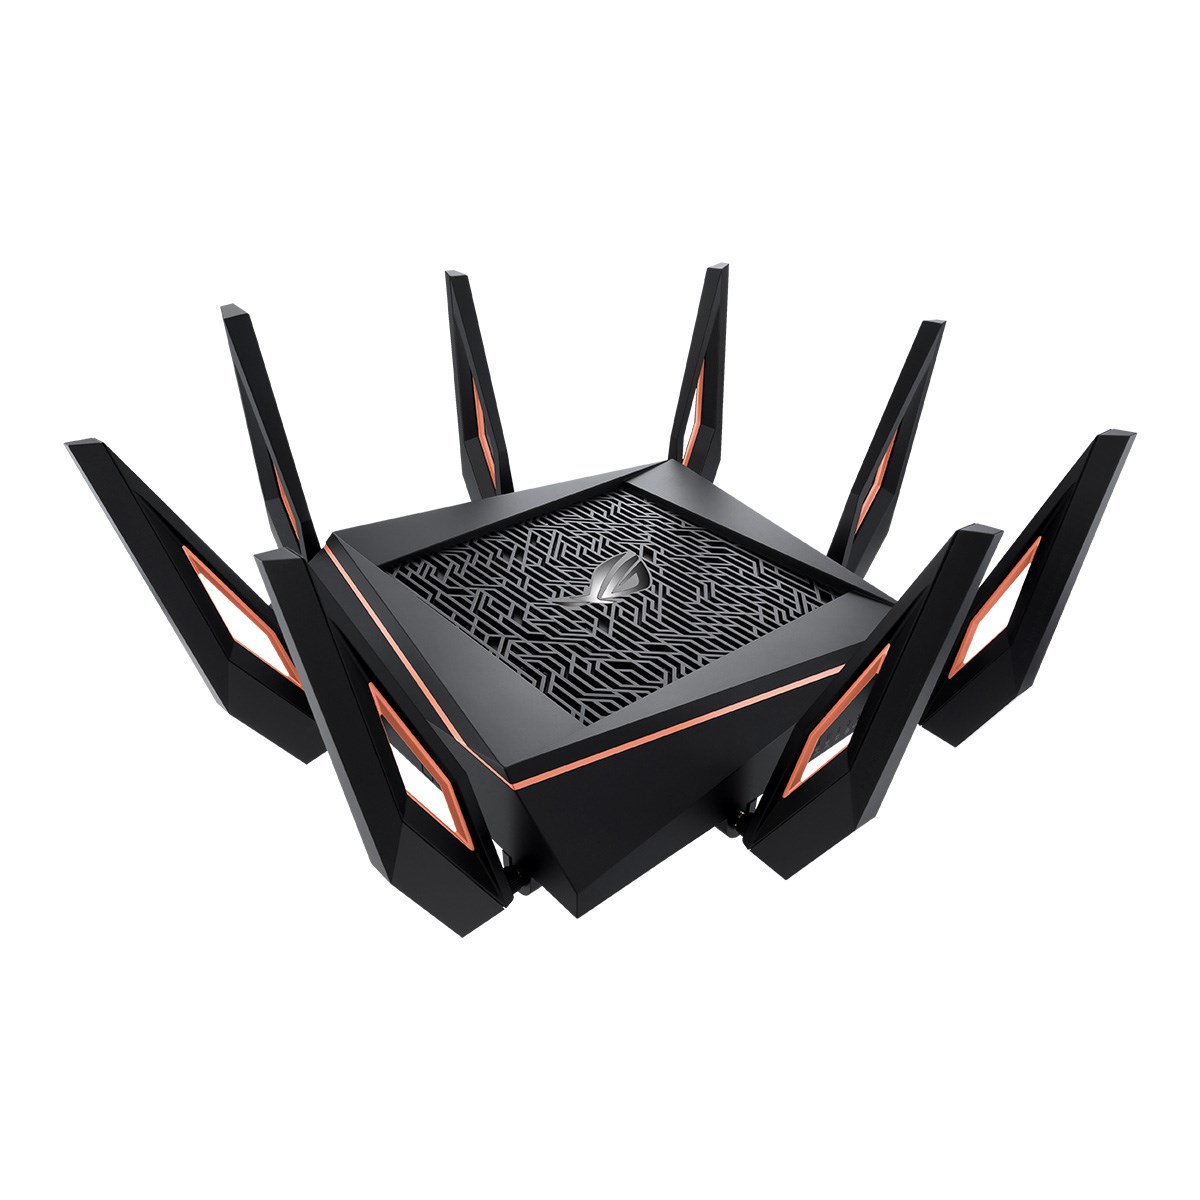 ASUS GT-AX11000 WIFI GAMING ROUTER